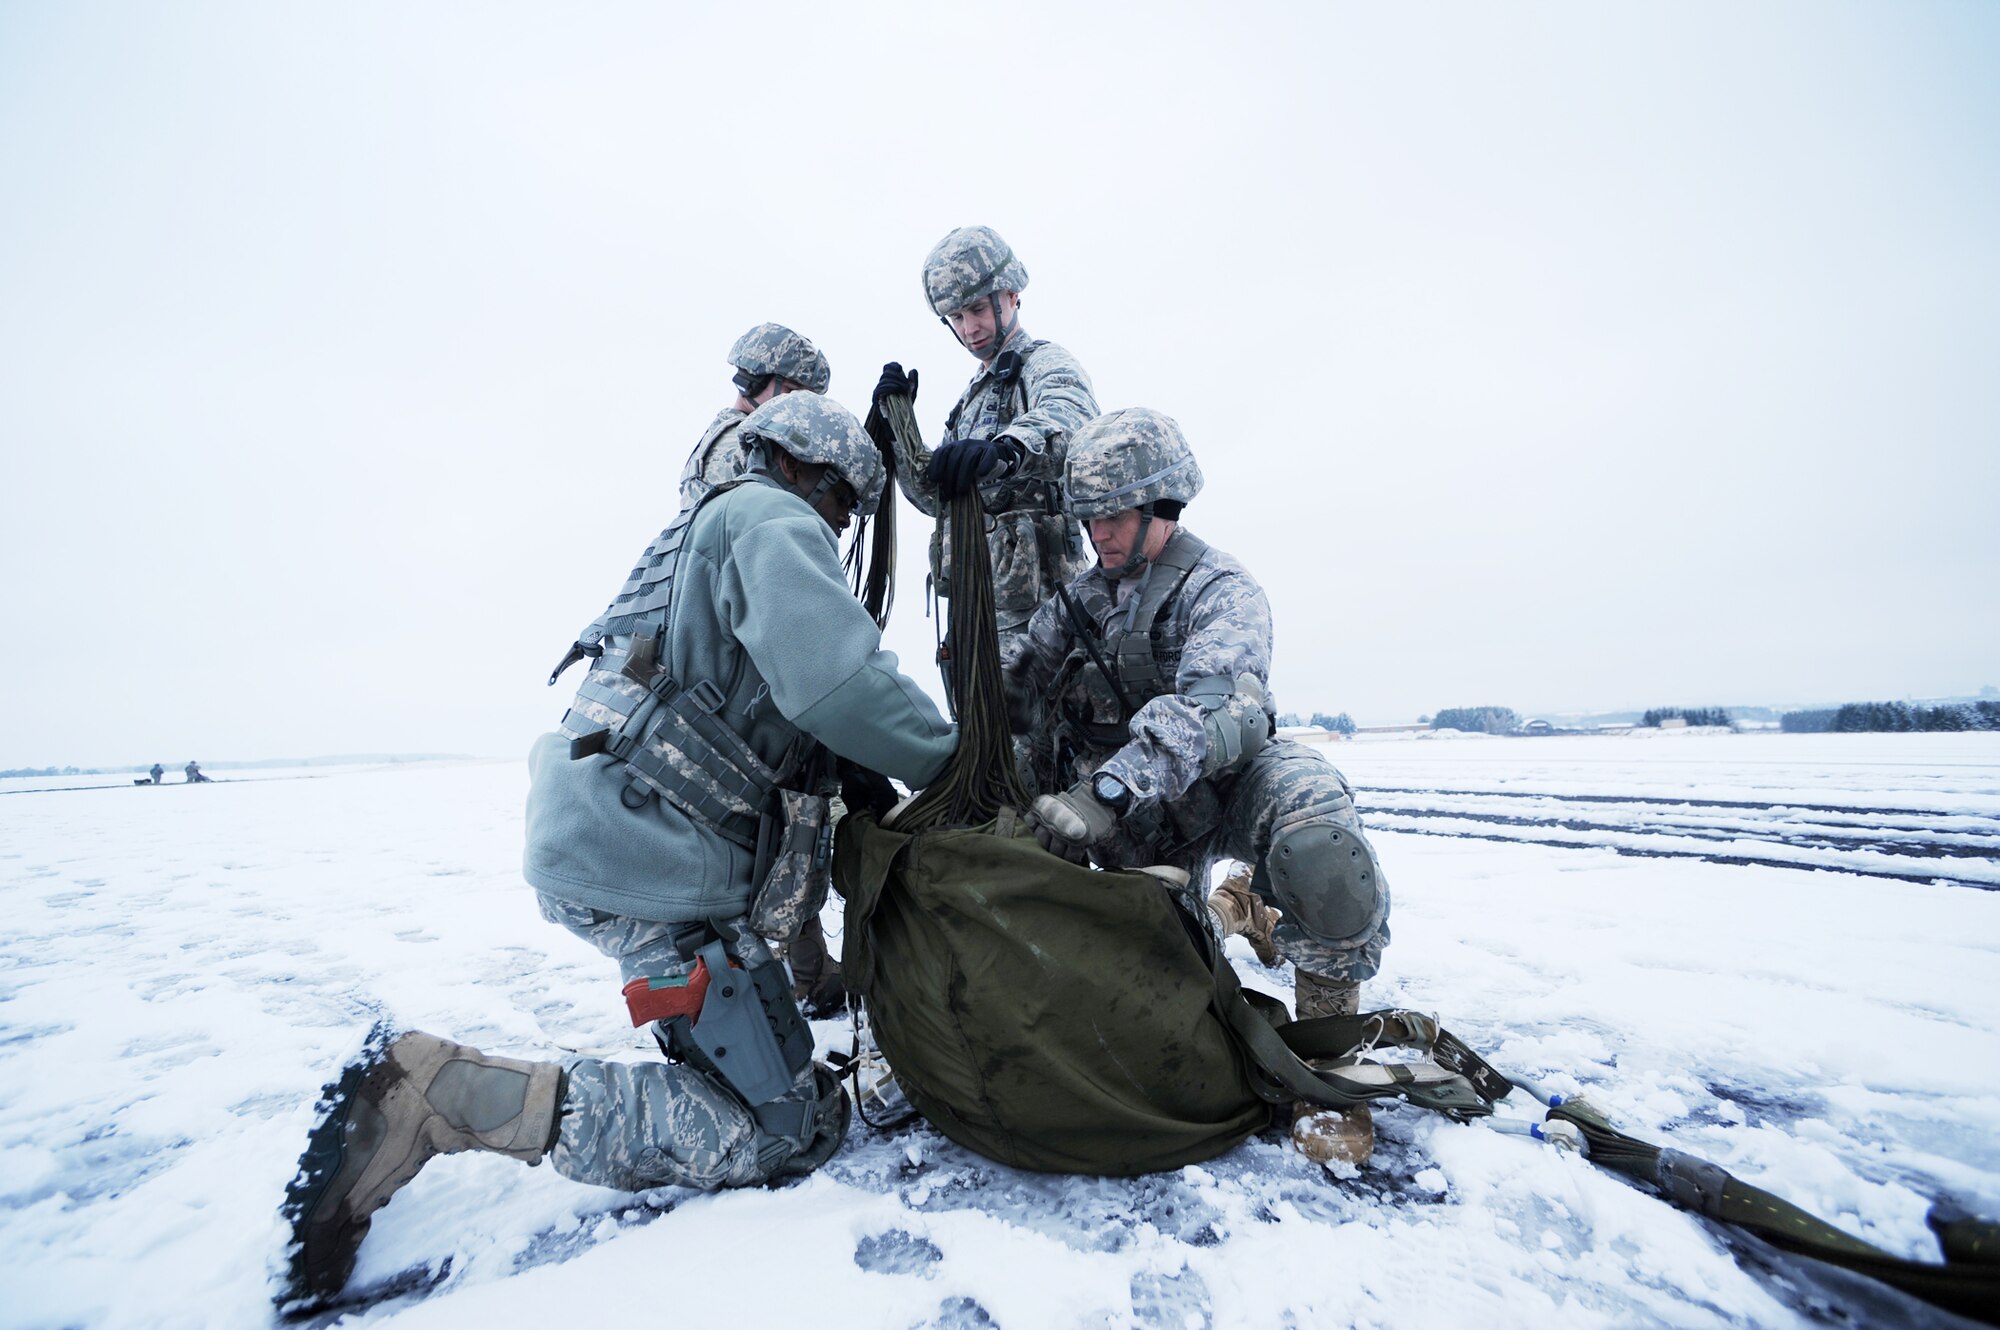 Airmen from the 435th Security Forces Squadron at Ramstein Air Base, Germany, secure equipment parachutes at nearby Bitburg Airport, Jan. 25, 2010, in preparation of Ramstein's operational readiness inspection in September. The unit is setting up bare-base operations as part of the dual-wing operational readiness exercise with the 86th Airlift Wing.   (U.S. Air Force photo/Staff Sgt. Sarayuth Pinthong)